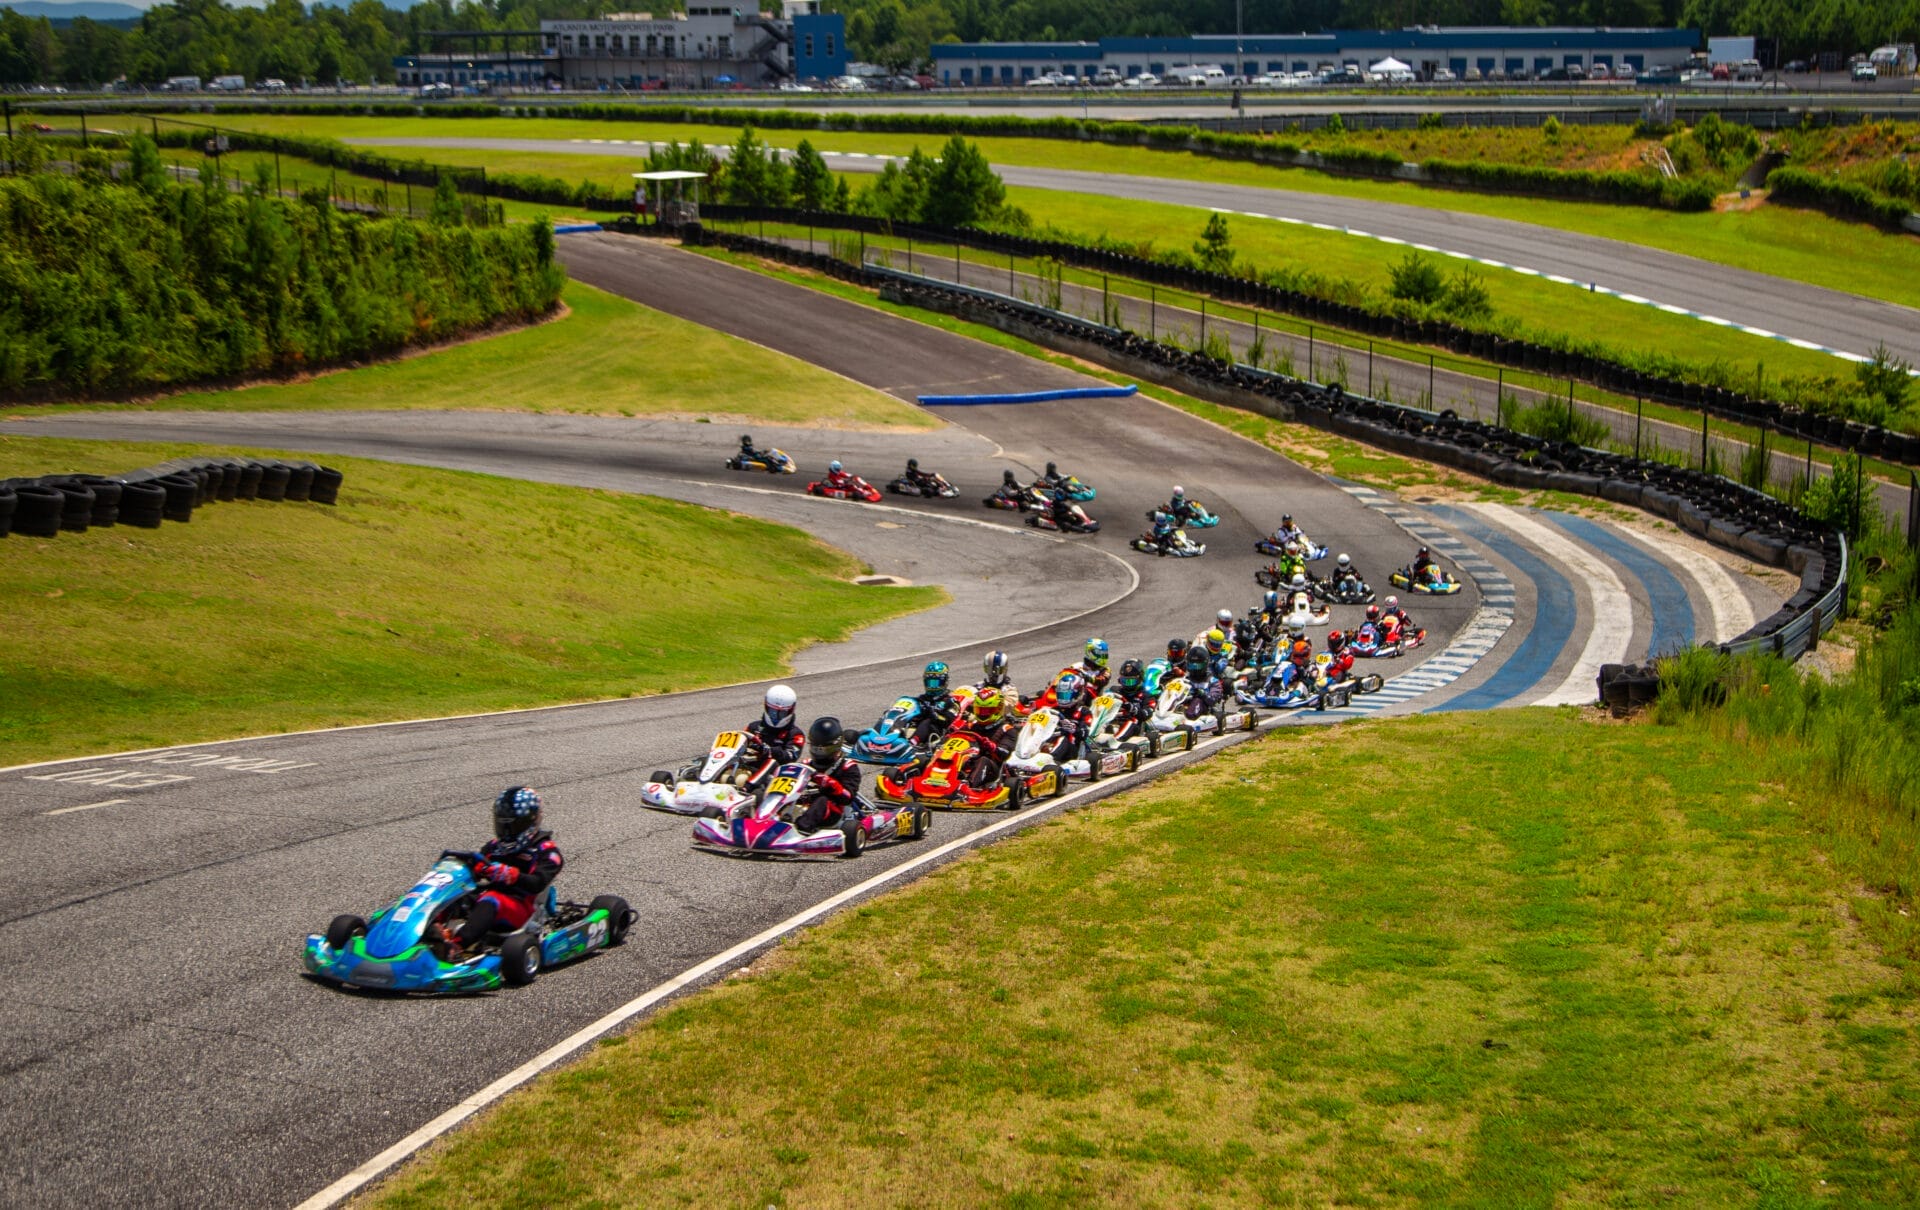 IMG 3004 - Revving Up for the AMP Kart Racing Summer Championship Series